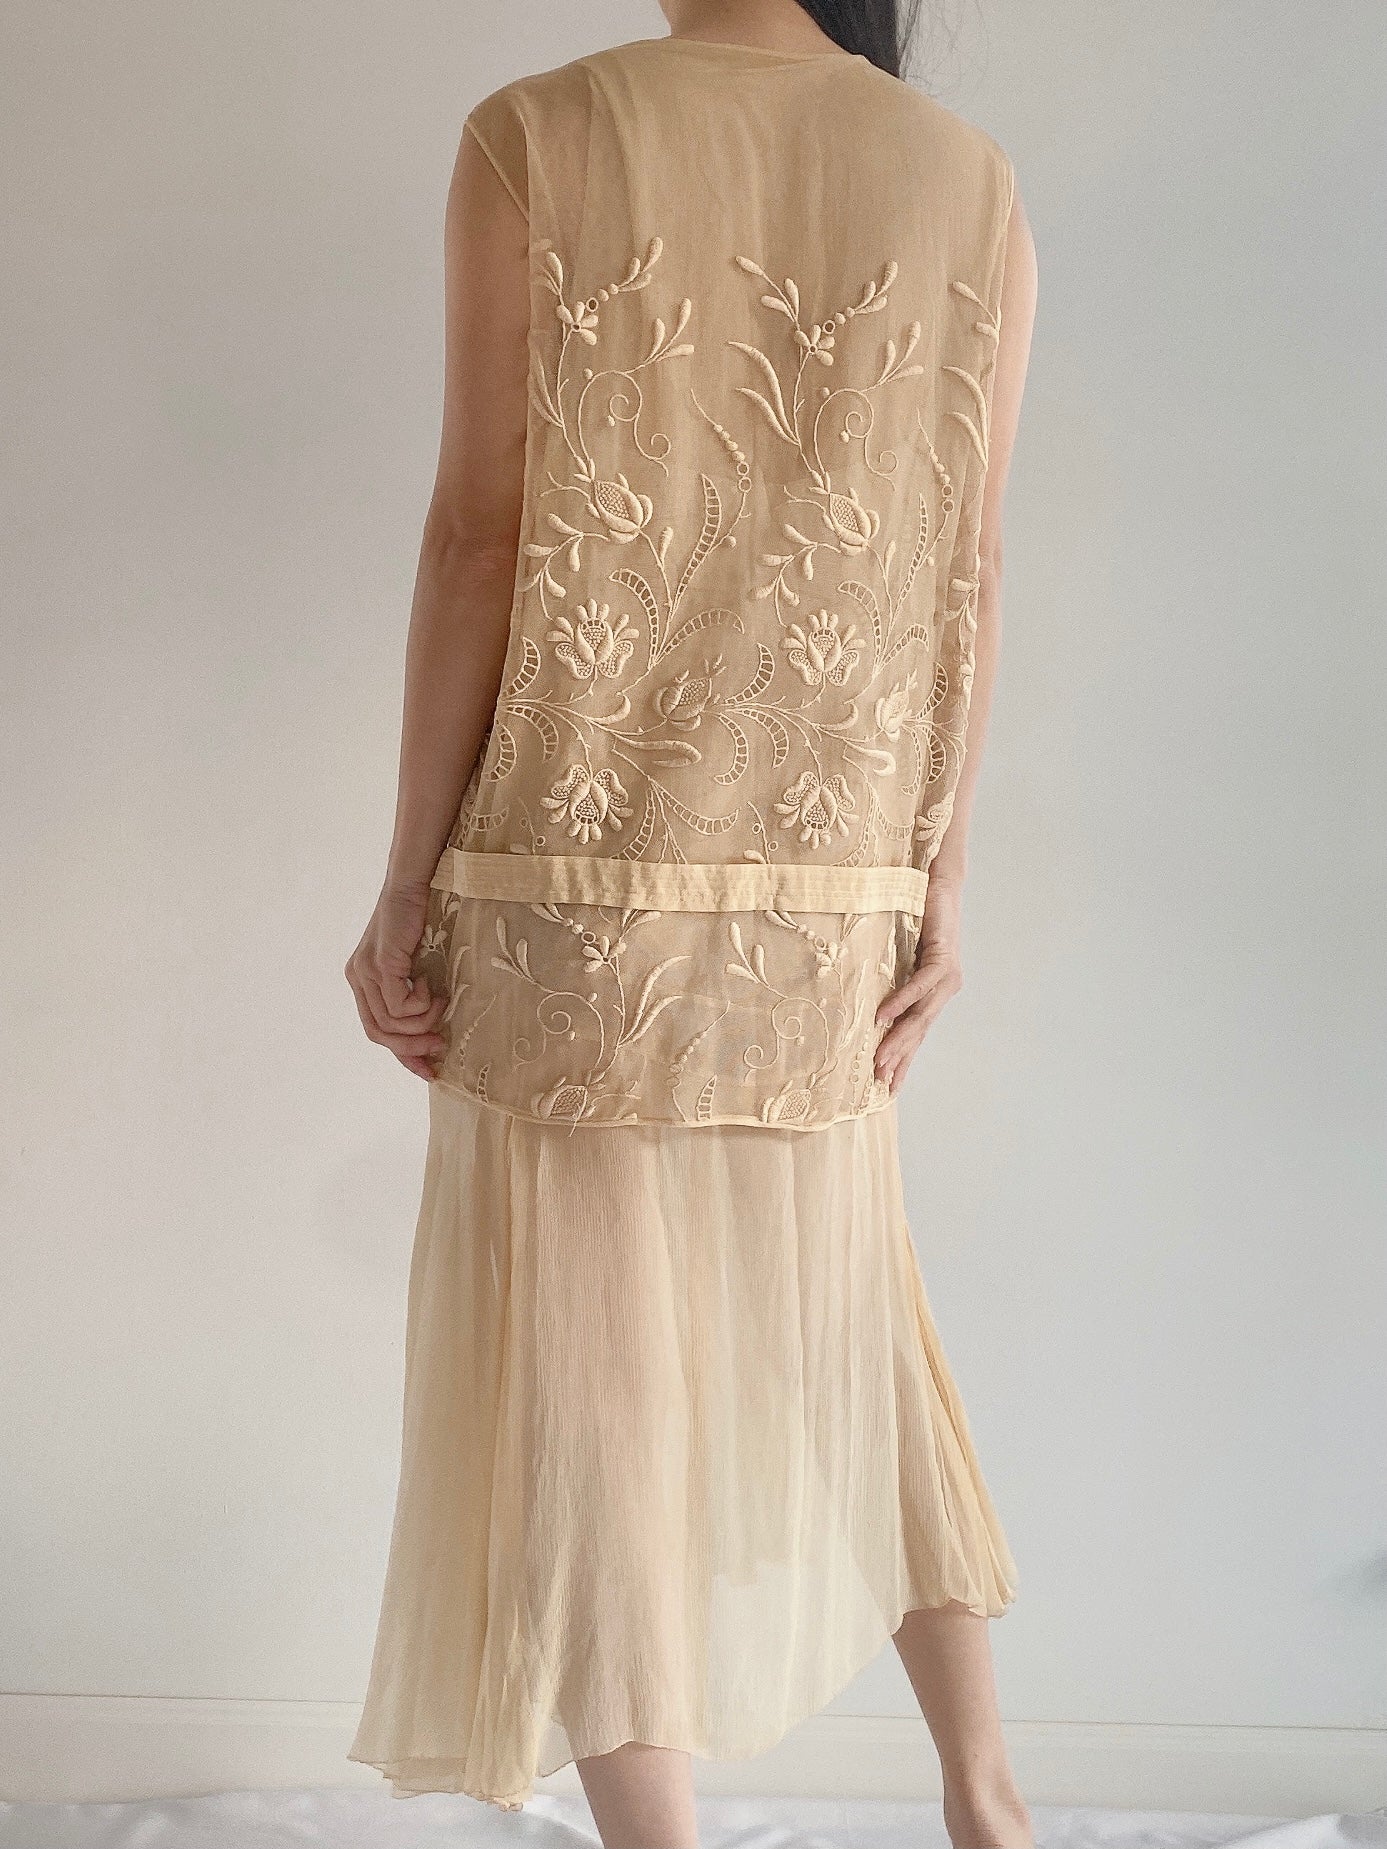 1920s Embroidered Flapper Dress with Silk Chiffon - S/M